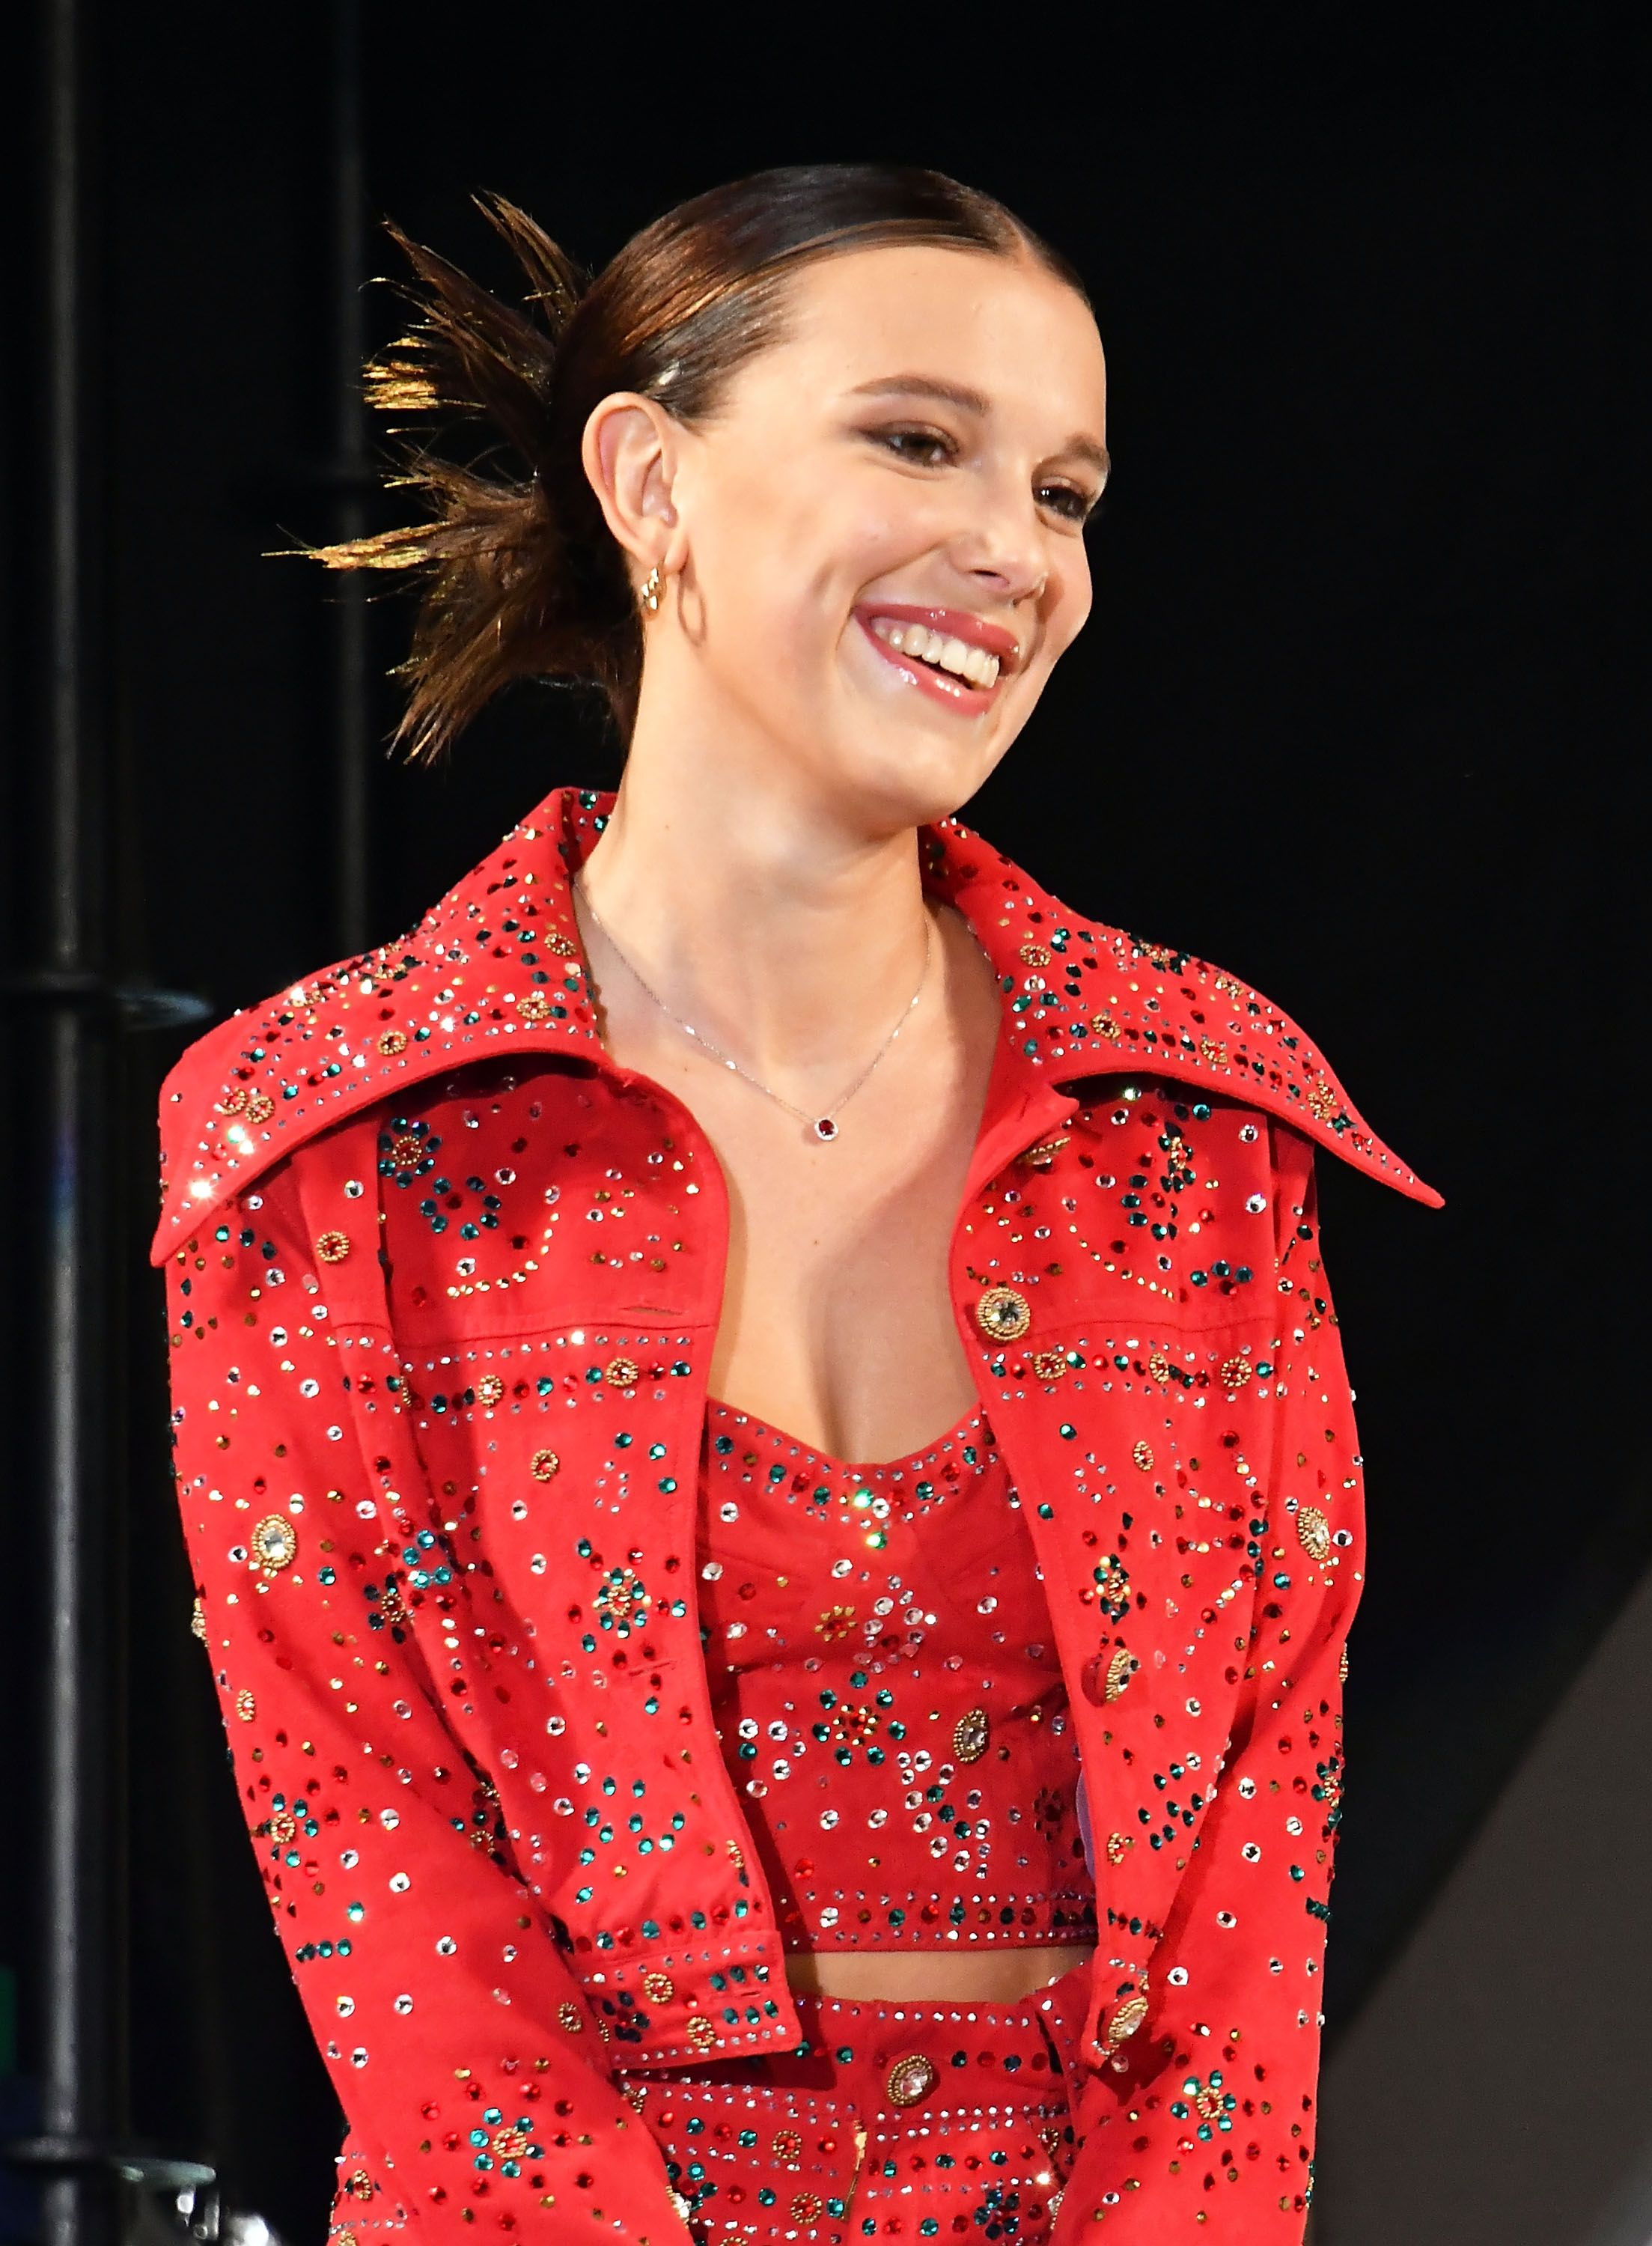 Millie Bobby Brown Wears a Red Bejeweled Co-ord and Cowboy Boots